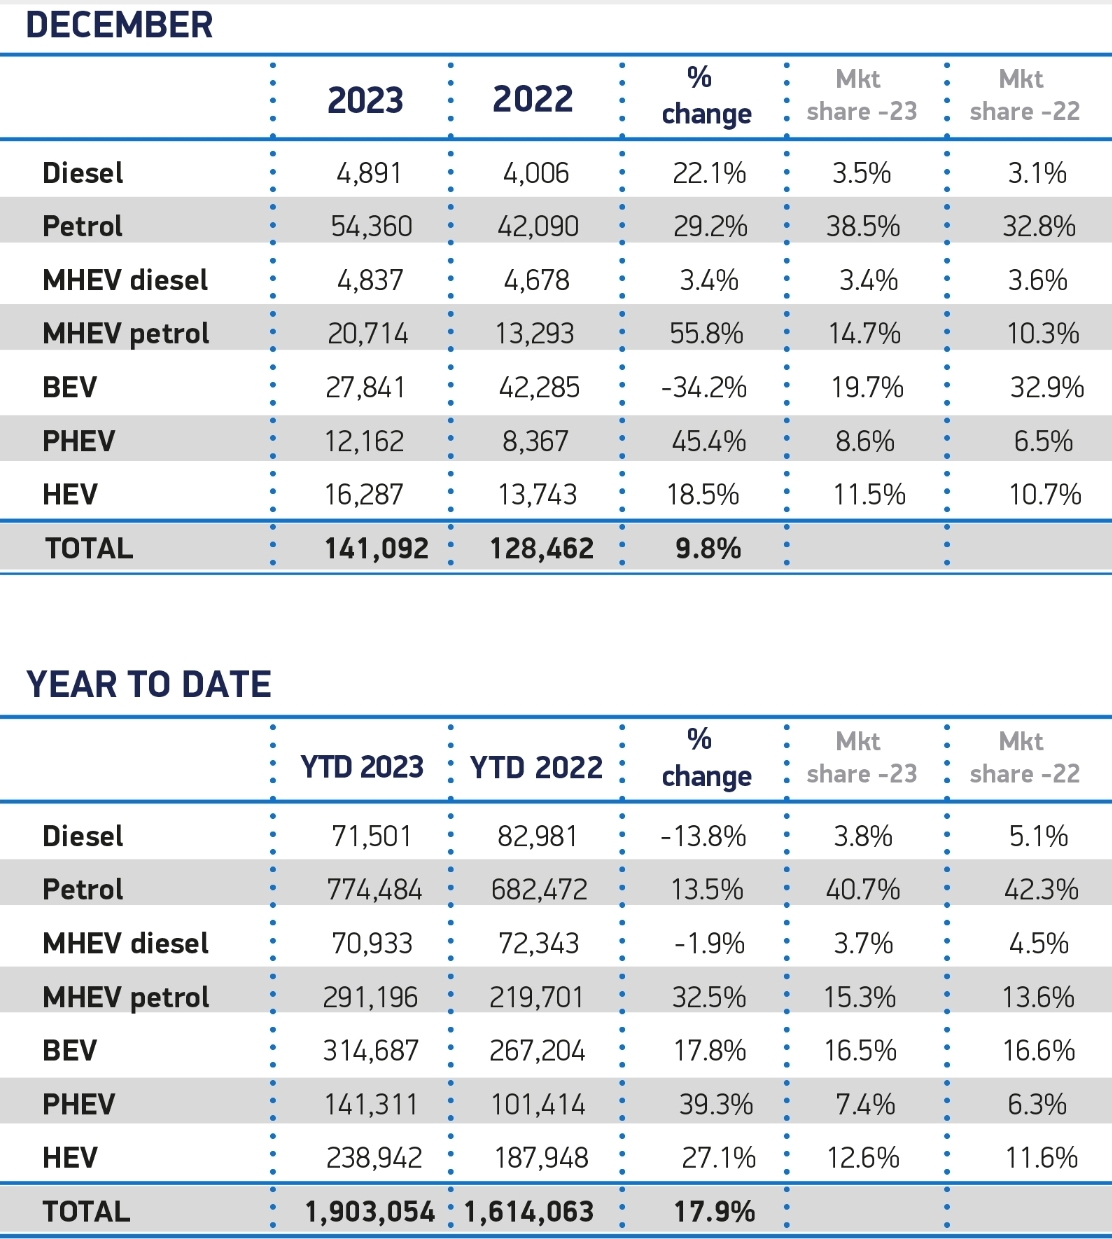 Pistonheads - The image presents a table from the Ministry of Mines and Petroleum, detailing the performance of various automotive companies for the year 2023. The table is bifurcated into two parts: one showing the figures in numbers, and the other displaying percentage changes.

The table lists the names of the companies - 'Diesel', 'Petrol', and 'MHV' - alongside their respective sales figures in millions of liters (mln). The numbers are accompanied by a visual representation in the form of a bar graph, indicating the volume of each company's sale.

A line graph is also included in the table, illustrating the year-on-year (YoY) growth rate for each company. This provides a more dynamic representation of their sales trends.

The figures suggest that despite the year-over-year decrease, the companies are experiencing growth in their sales volumes. The exact nature of this growth and its implications for the industry remain unclear from the image alone.